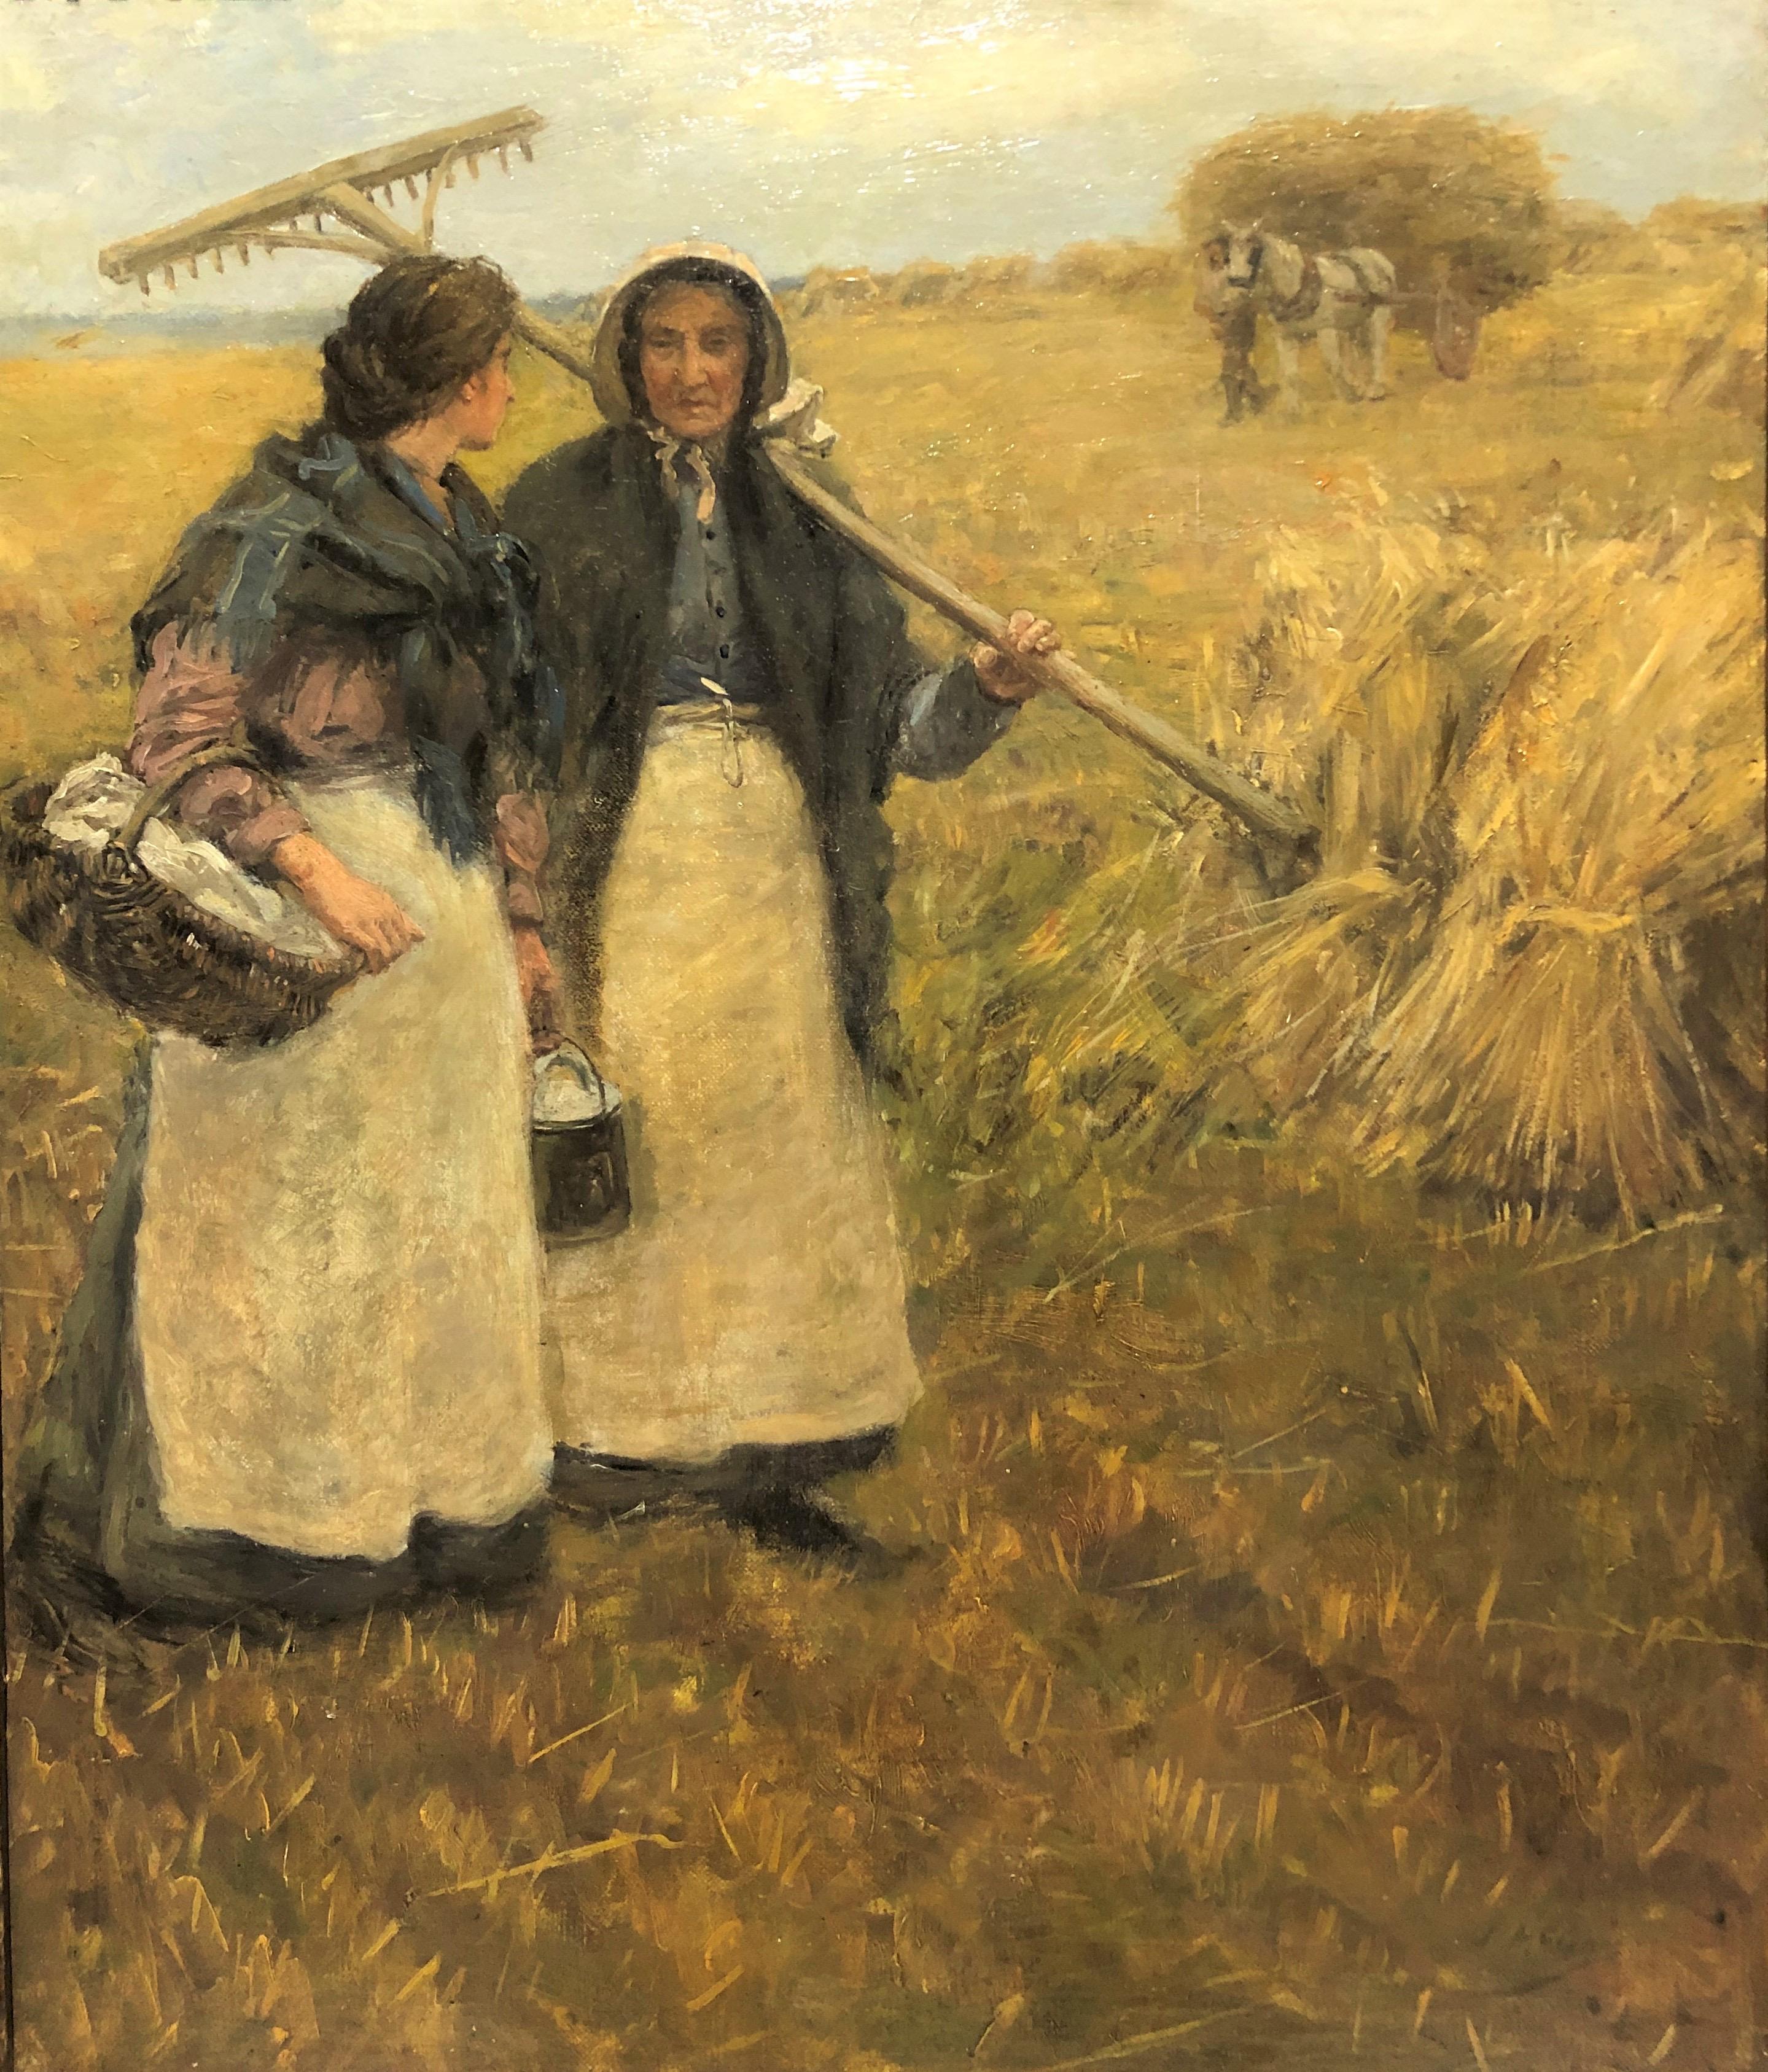 20th century British Impressionist oil of two women harvesting in a landscape - Painting by John McGhie